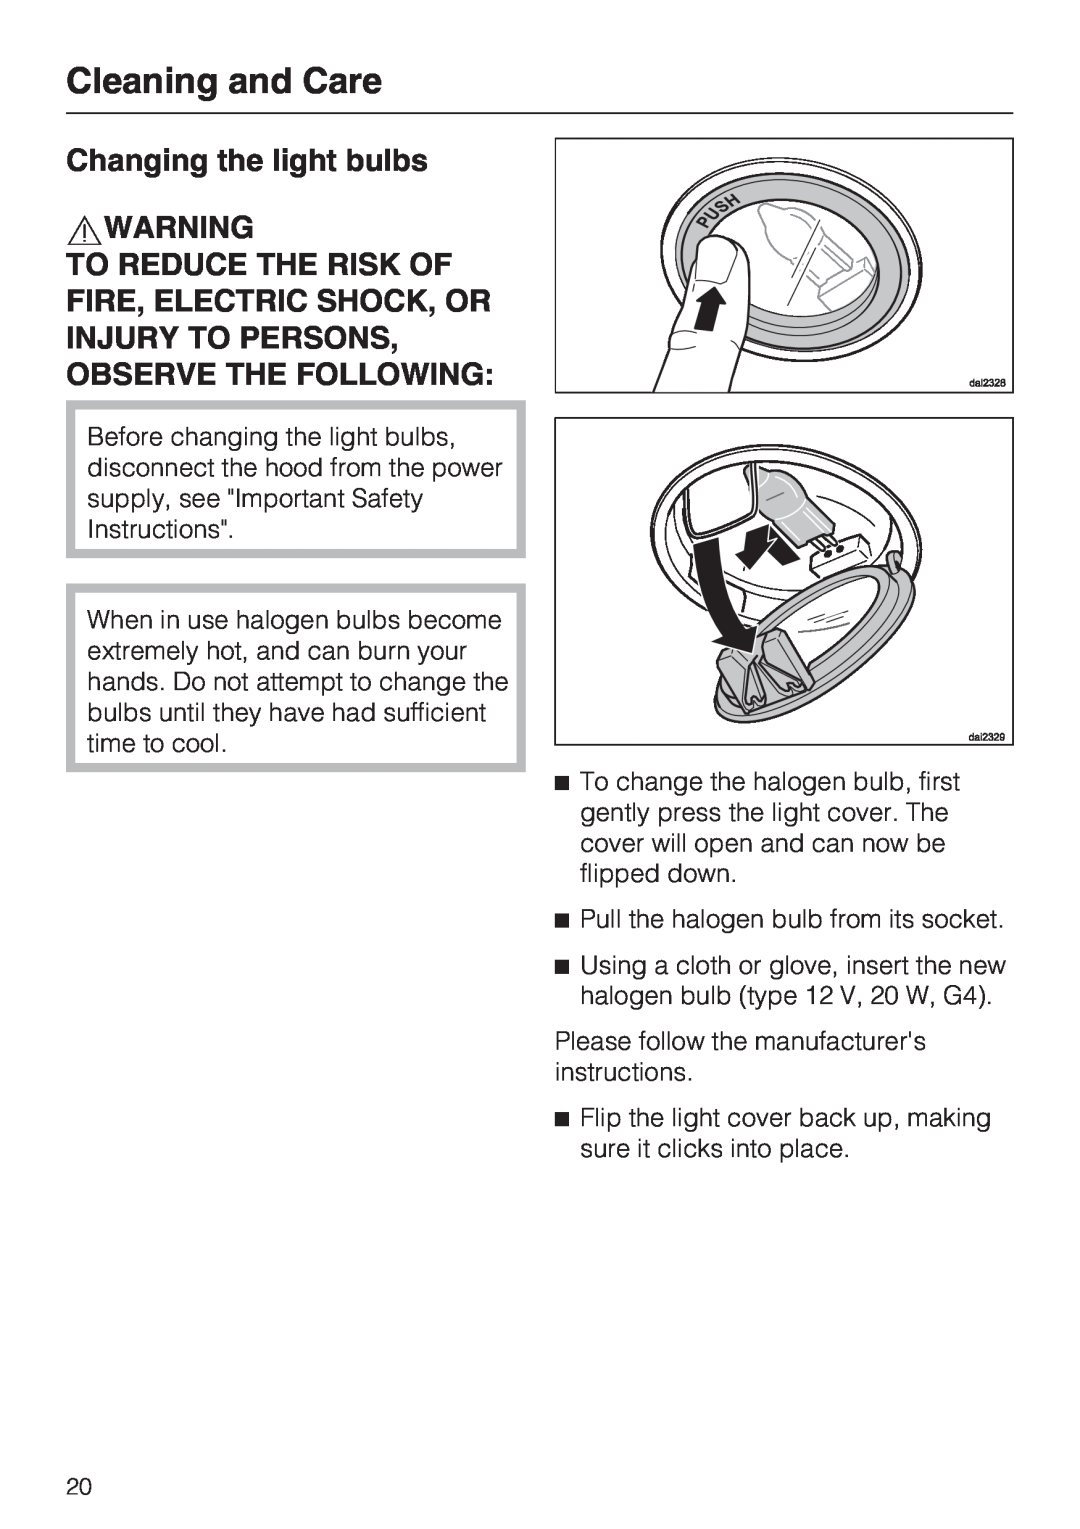 Miele DA 6290 W installation instructions Changing the light bulbs, Cleaning and Care 